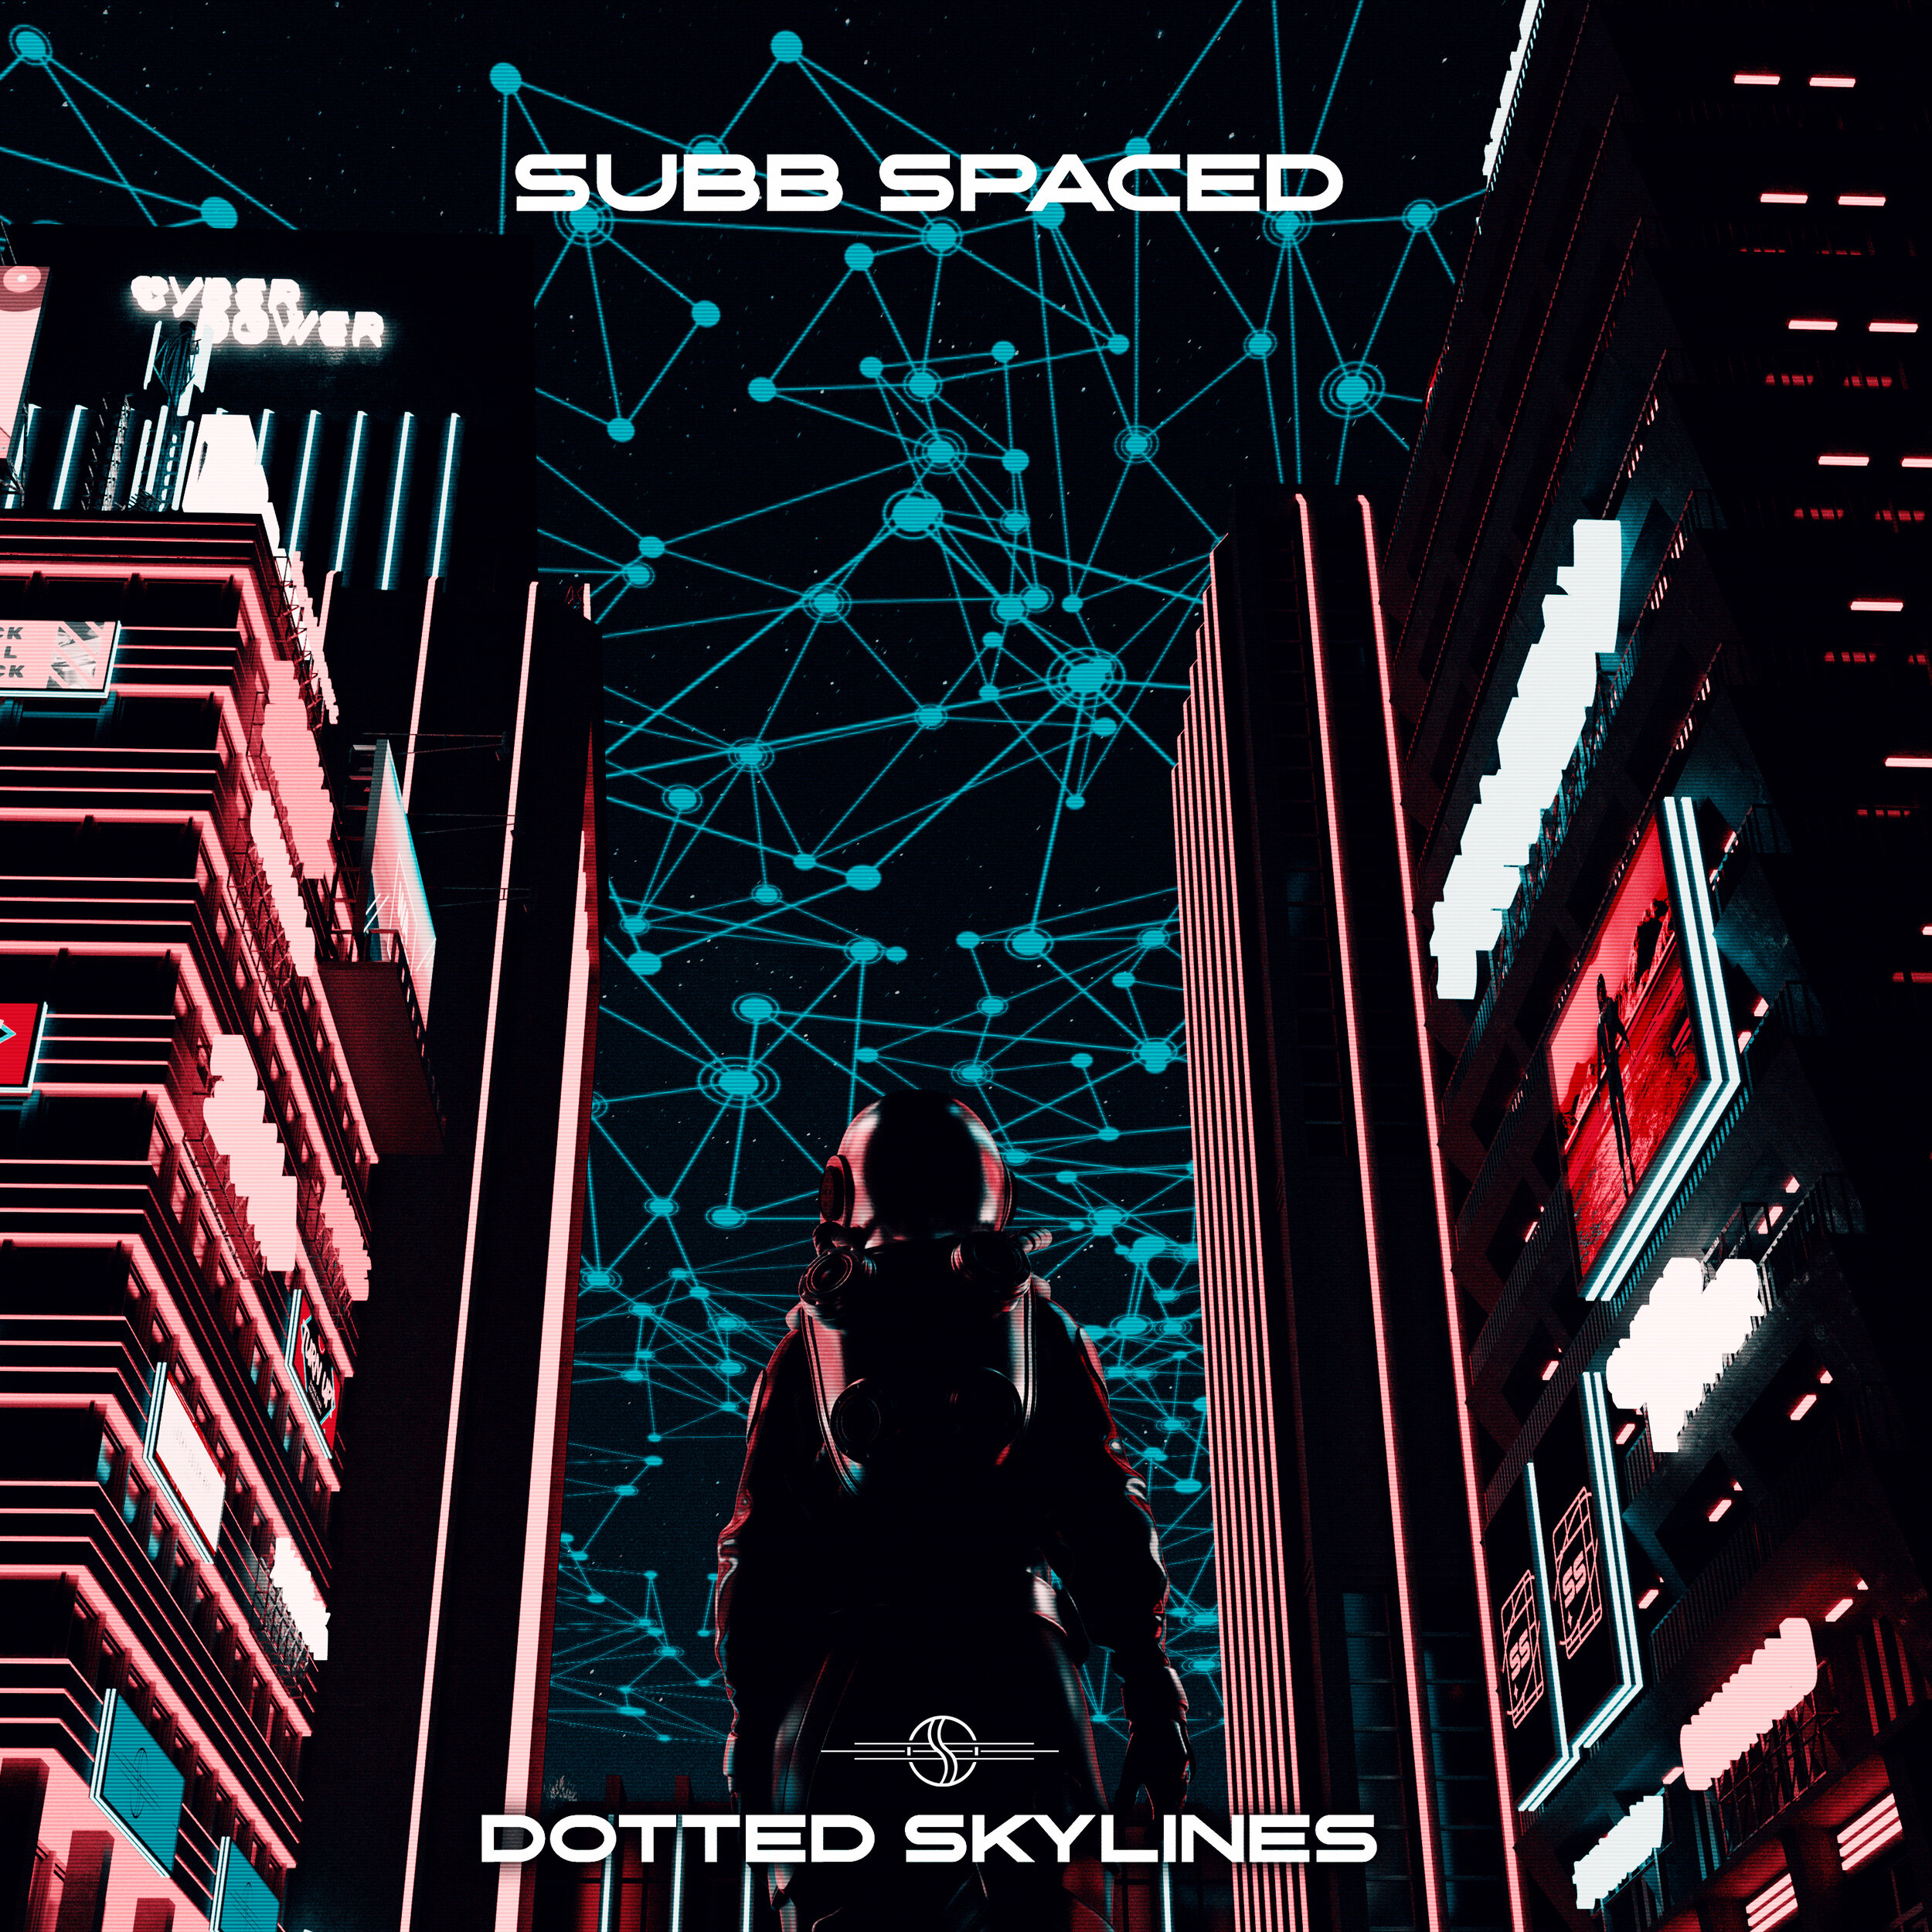 subb-dotted-skyline-official.jpg